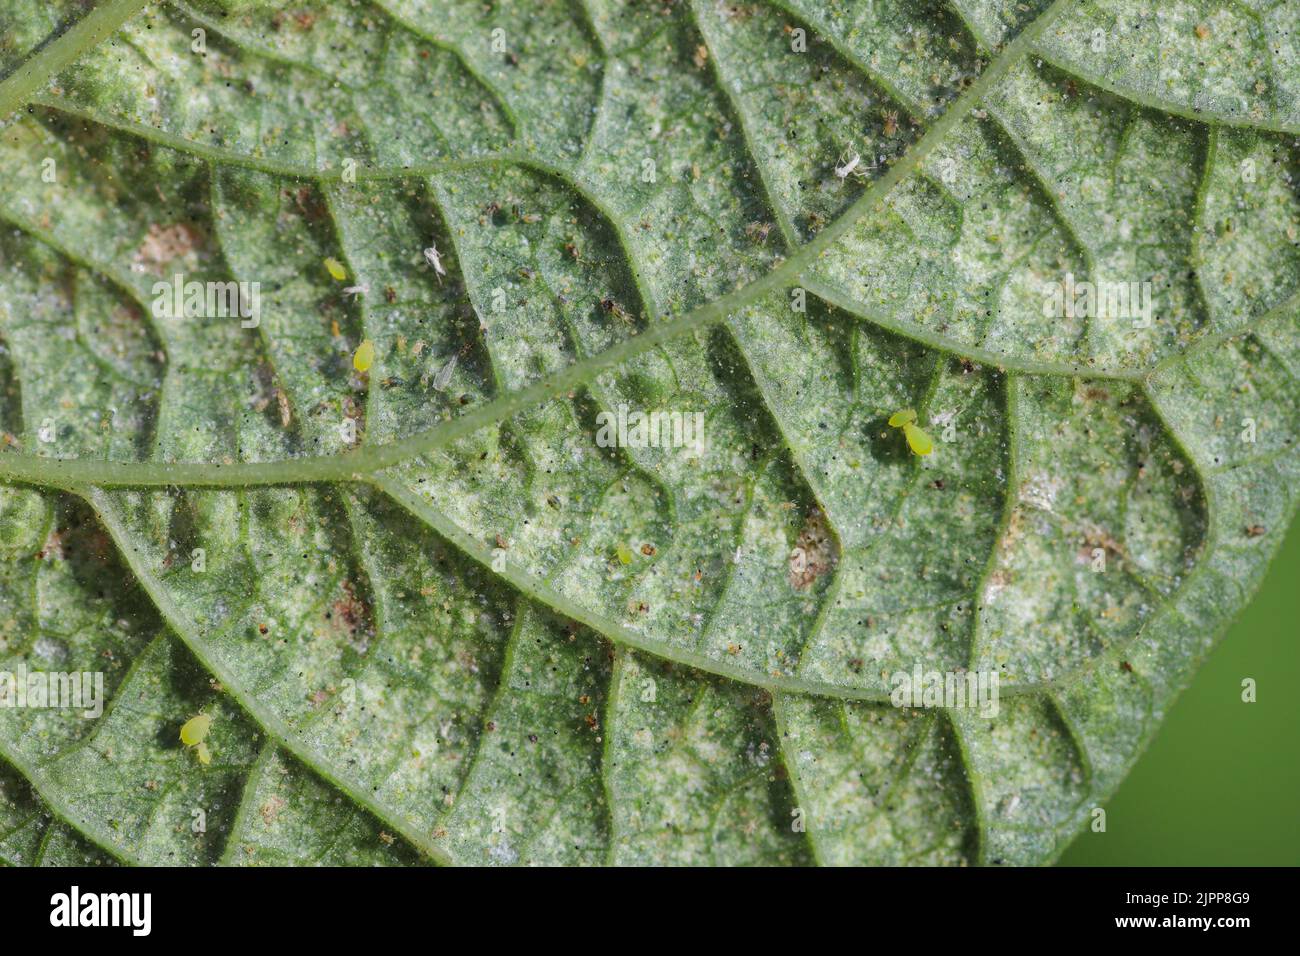 Tetranychus urticae (red spider mite or two-spotted spider mite) is a species of plant-feeding mite a pest of many plants. Damage on the bean leaves. Stock Photo